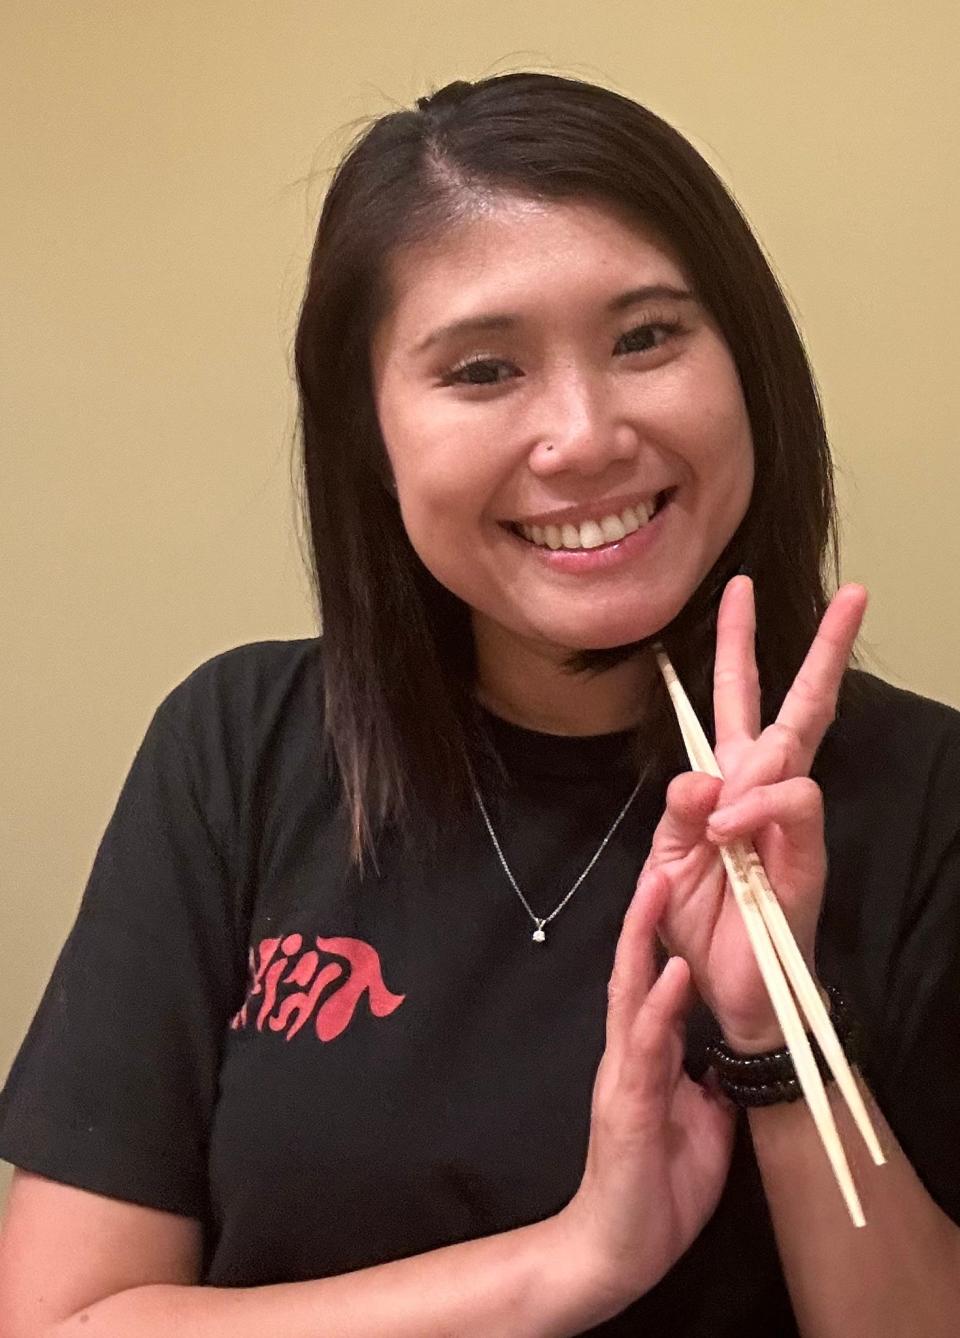 Well known for her Instagram account @eats_and_noods, Lenny Dewi is also a cardiac rehab RN in Round Rock Medical Center and a cook at Thai Kun and P Thai’s Khao Man Gai.